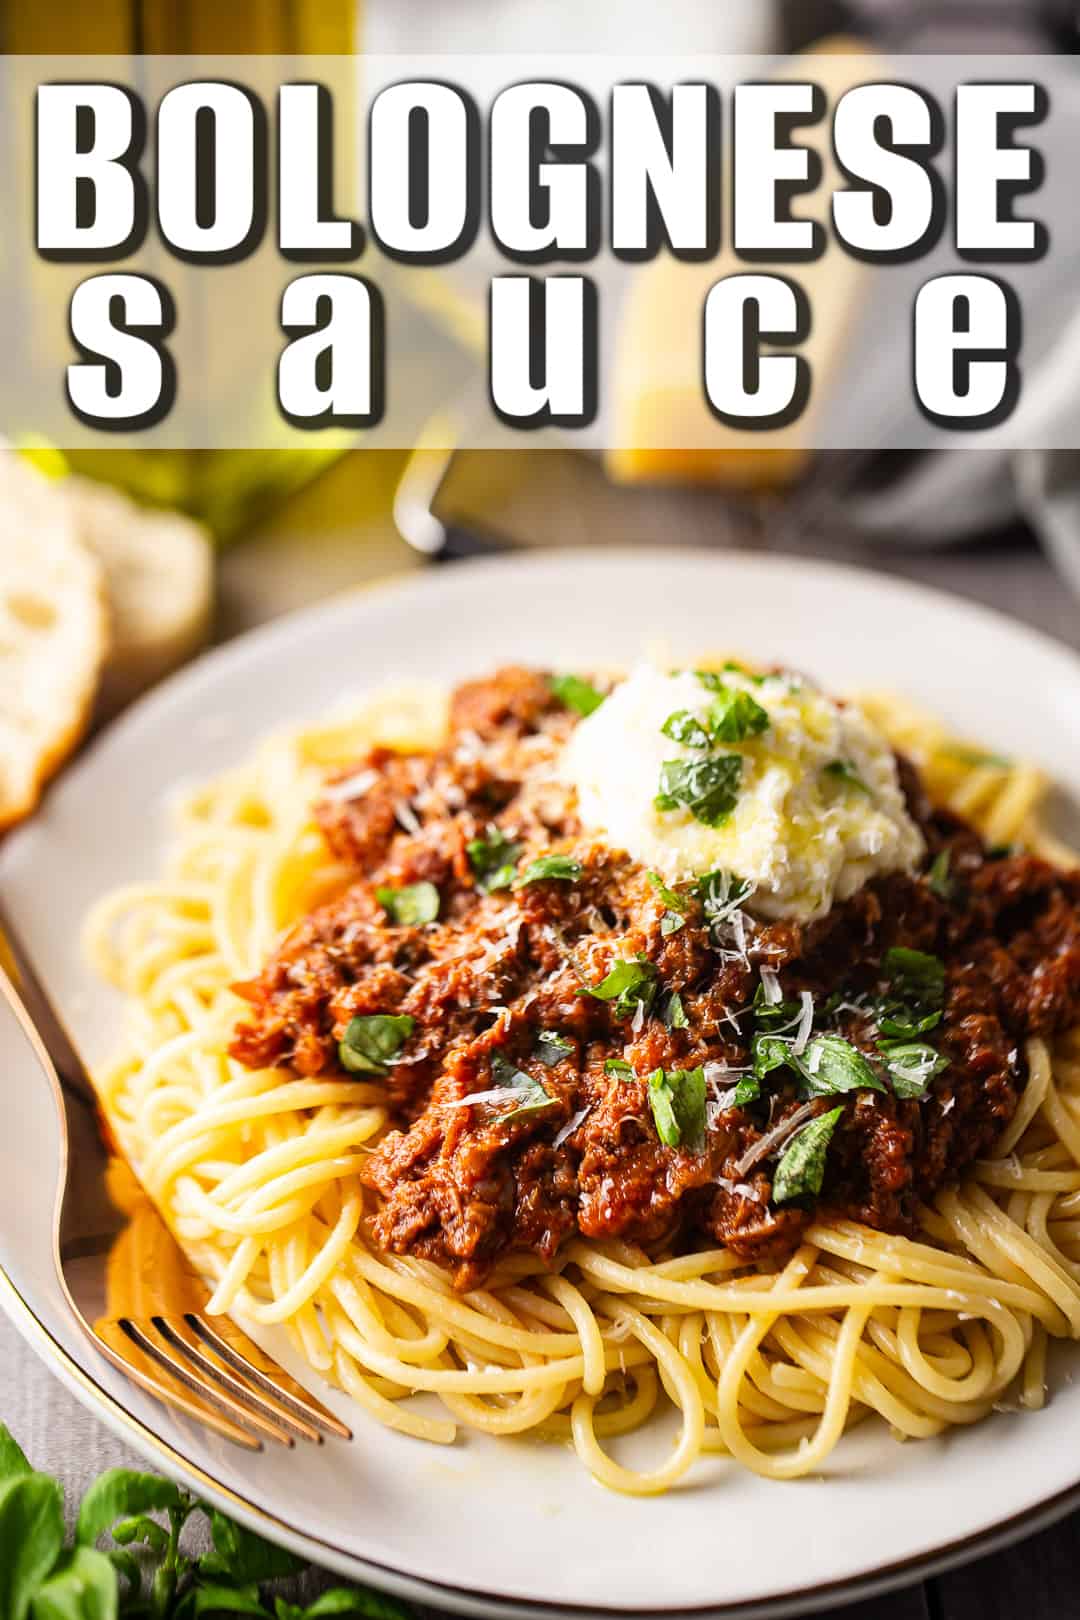 Bolognese recipe, prepared and served over pasta with fresh basil.